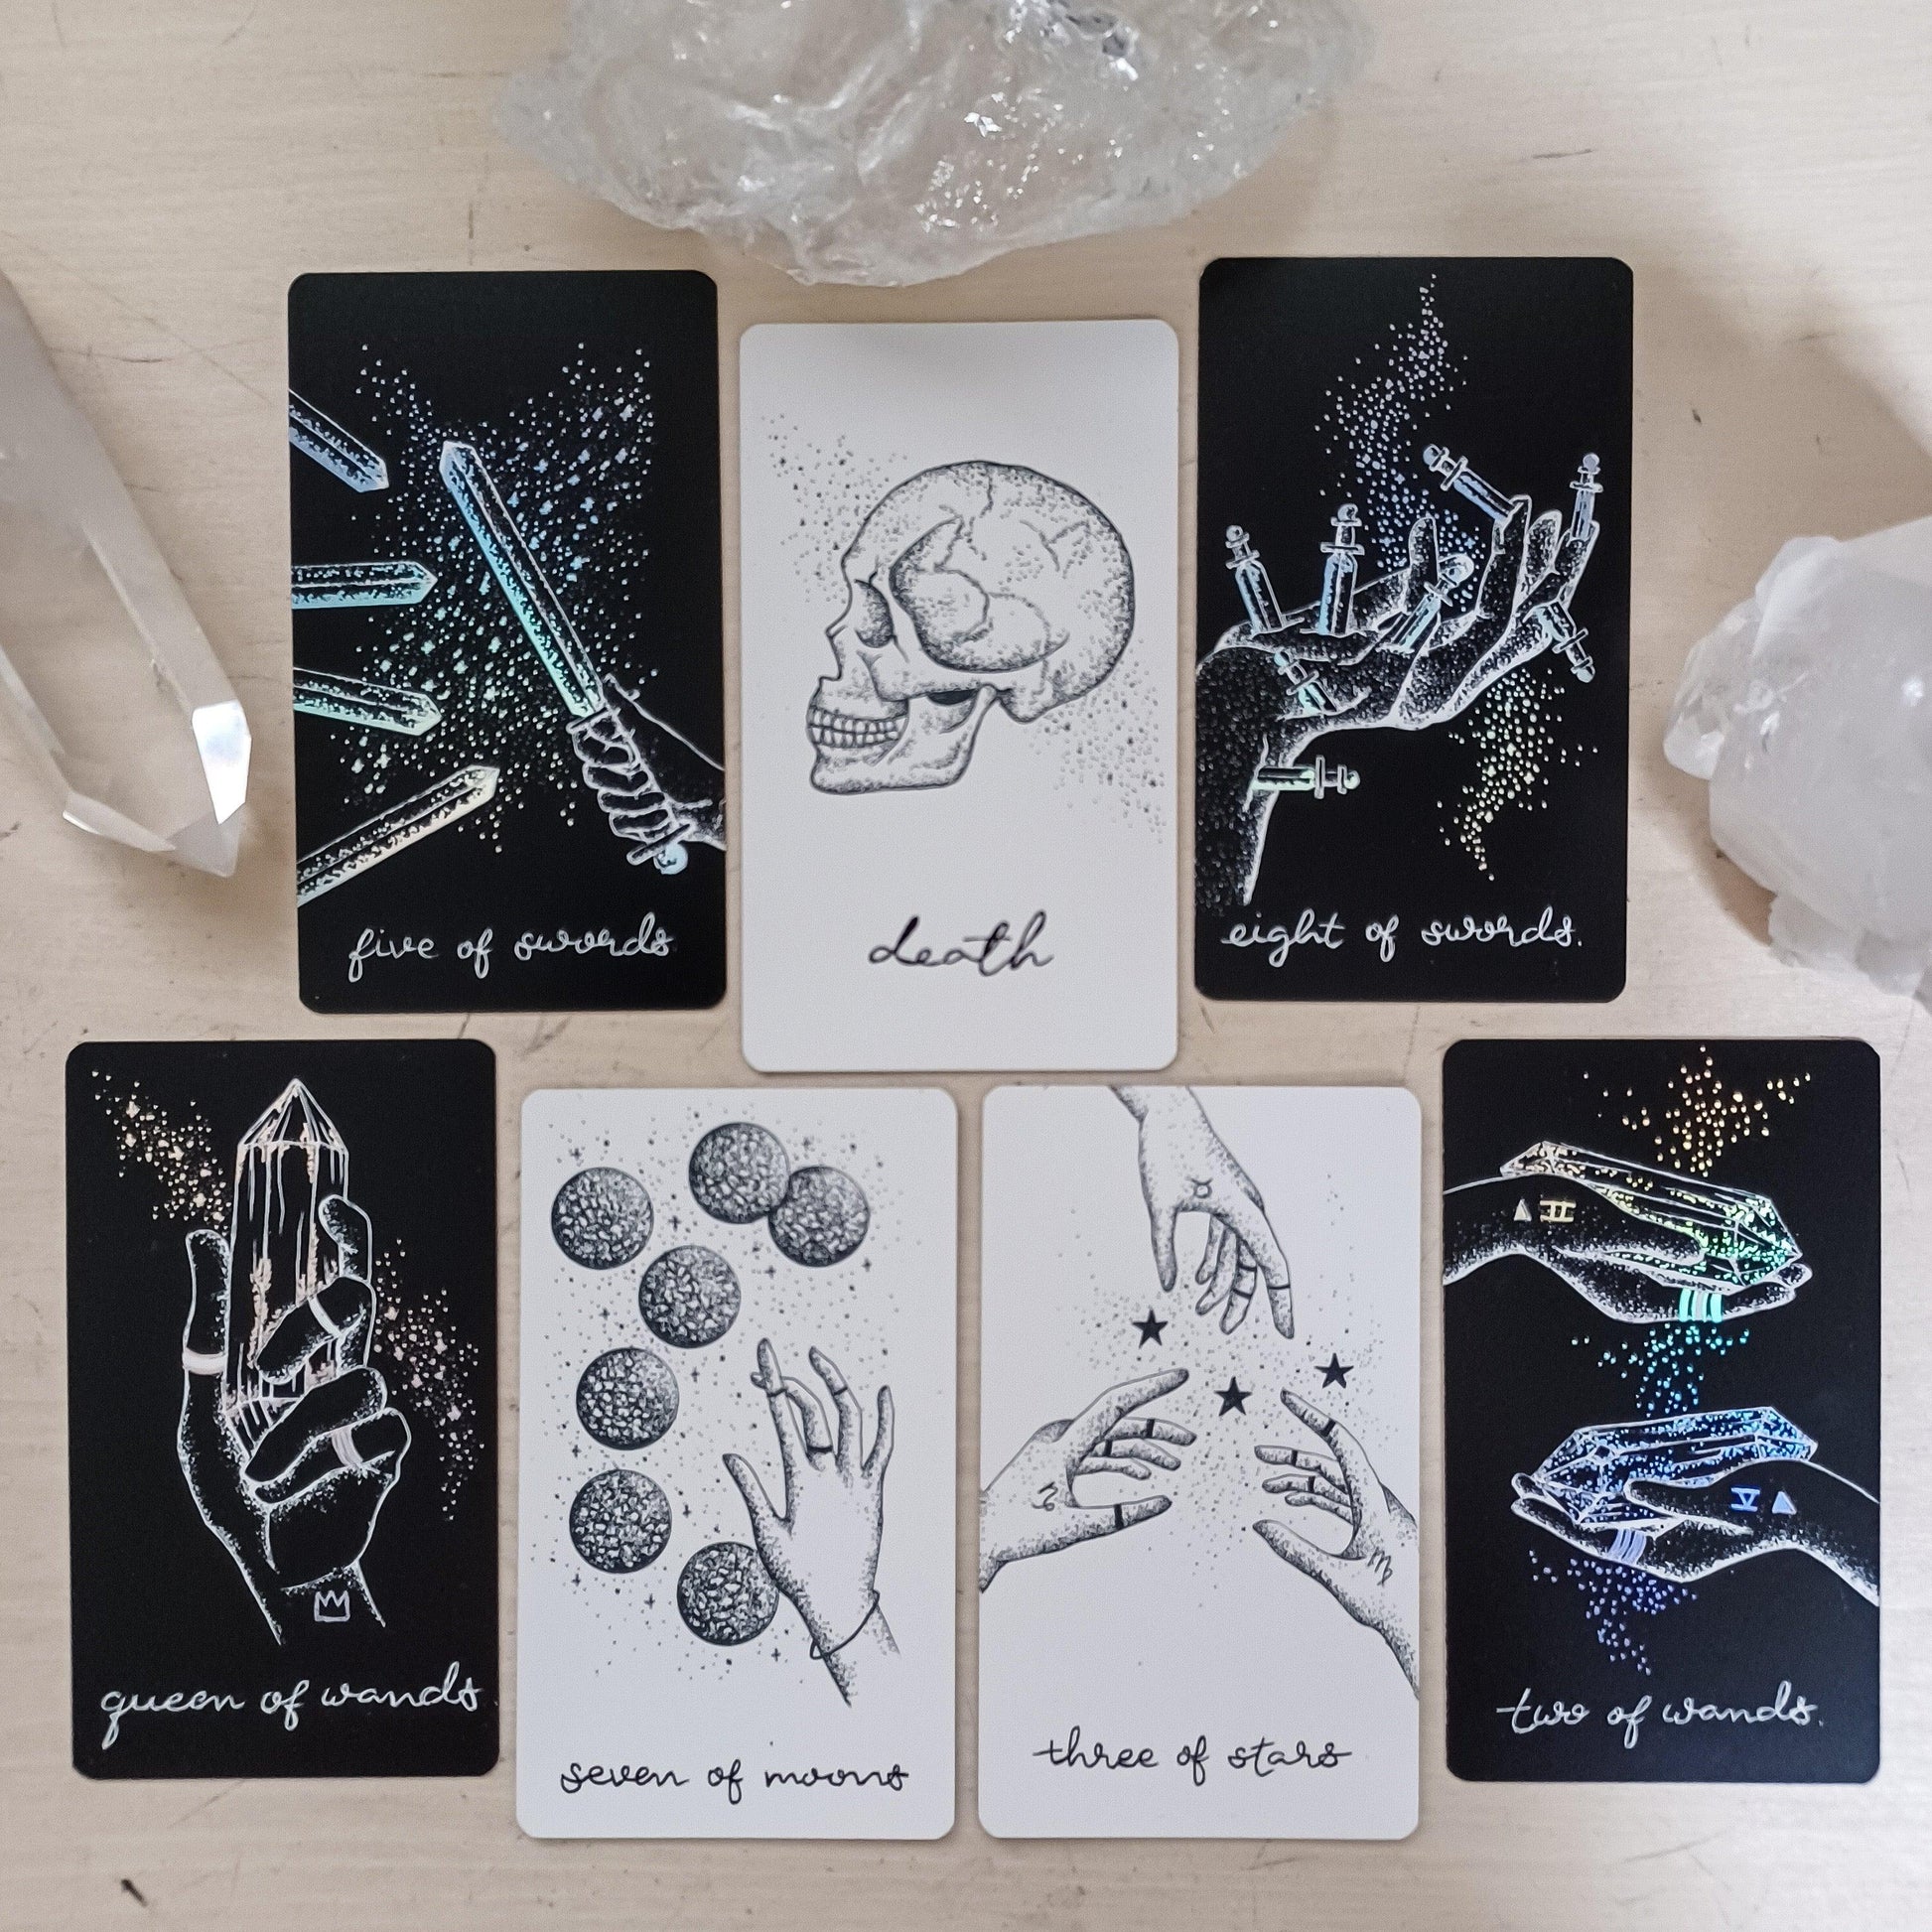 tarot cards from Midnight Sky with tarot cards from Wandering Moon Tarot, inverted black & white